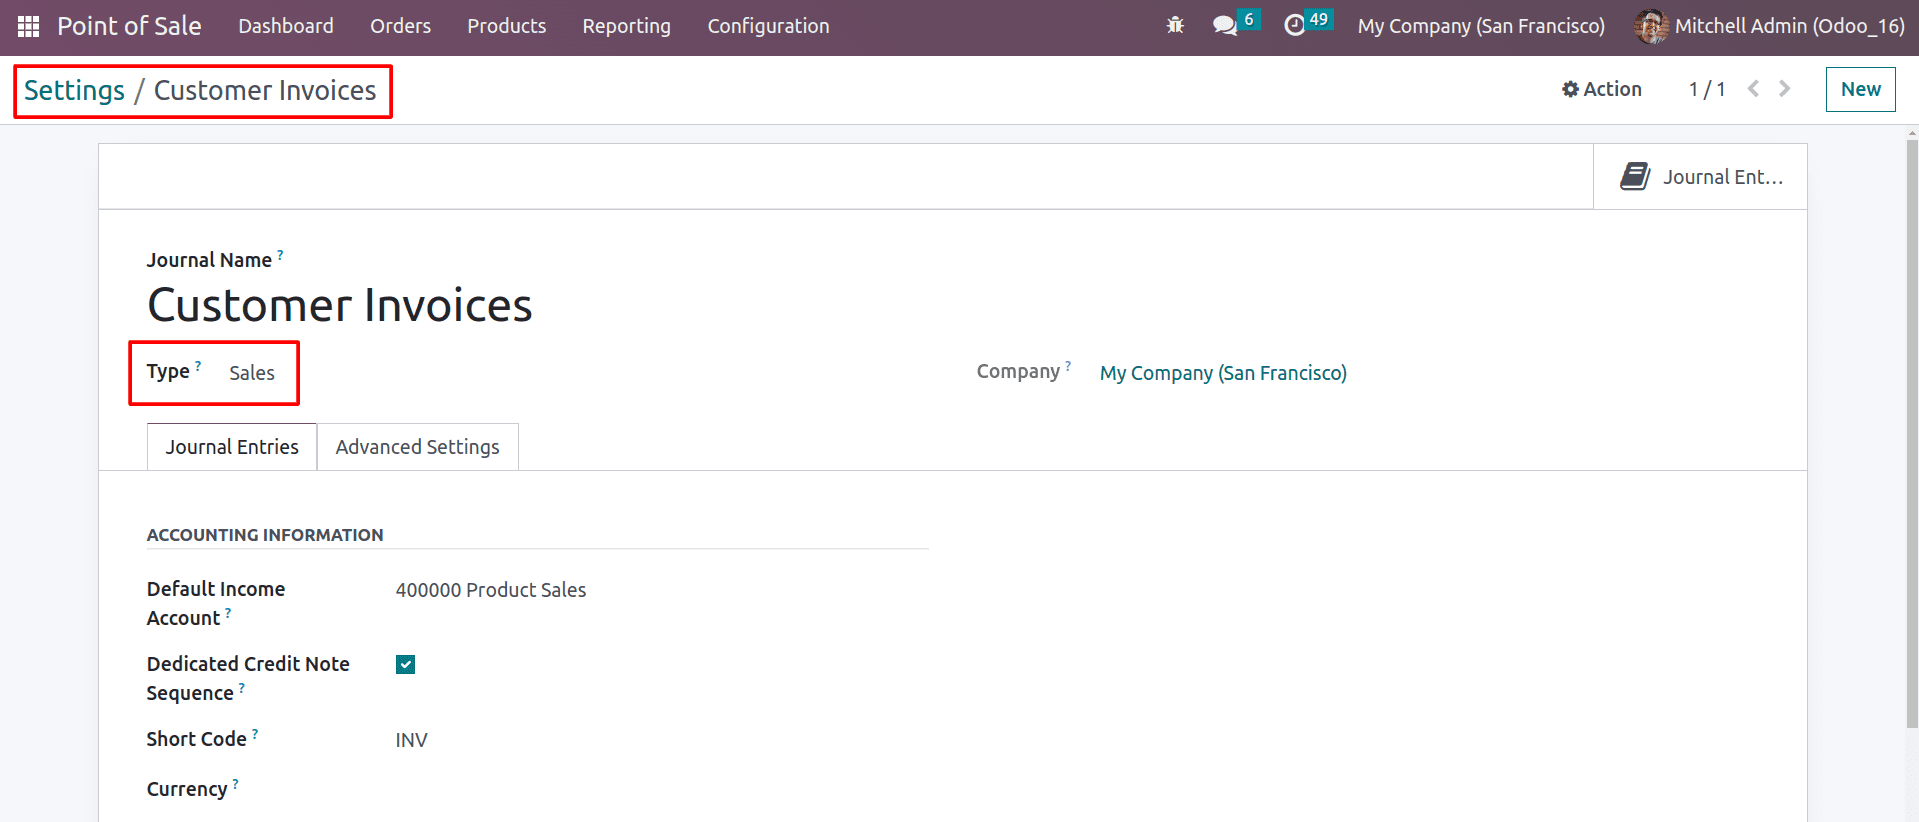 An Overview of Managing Accounts with Odoo 16 POS App-cybrosys